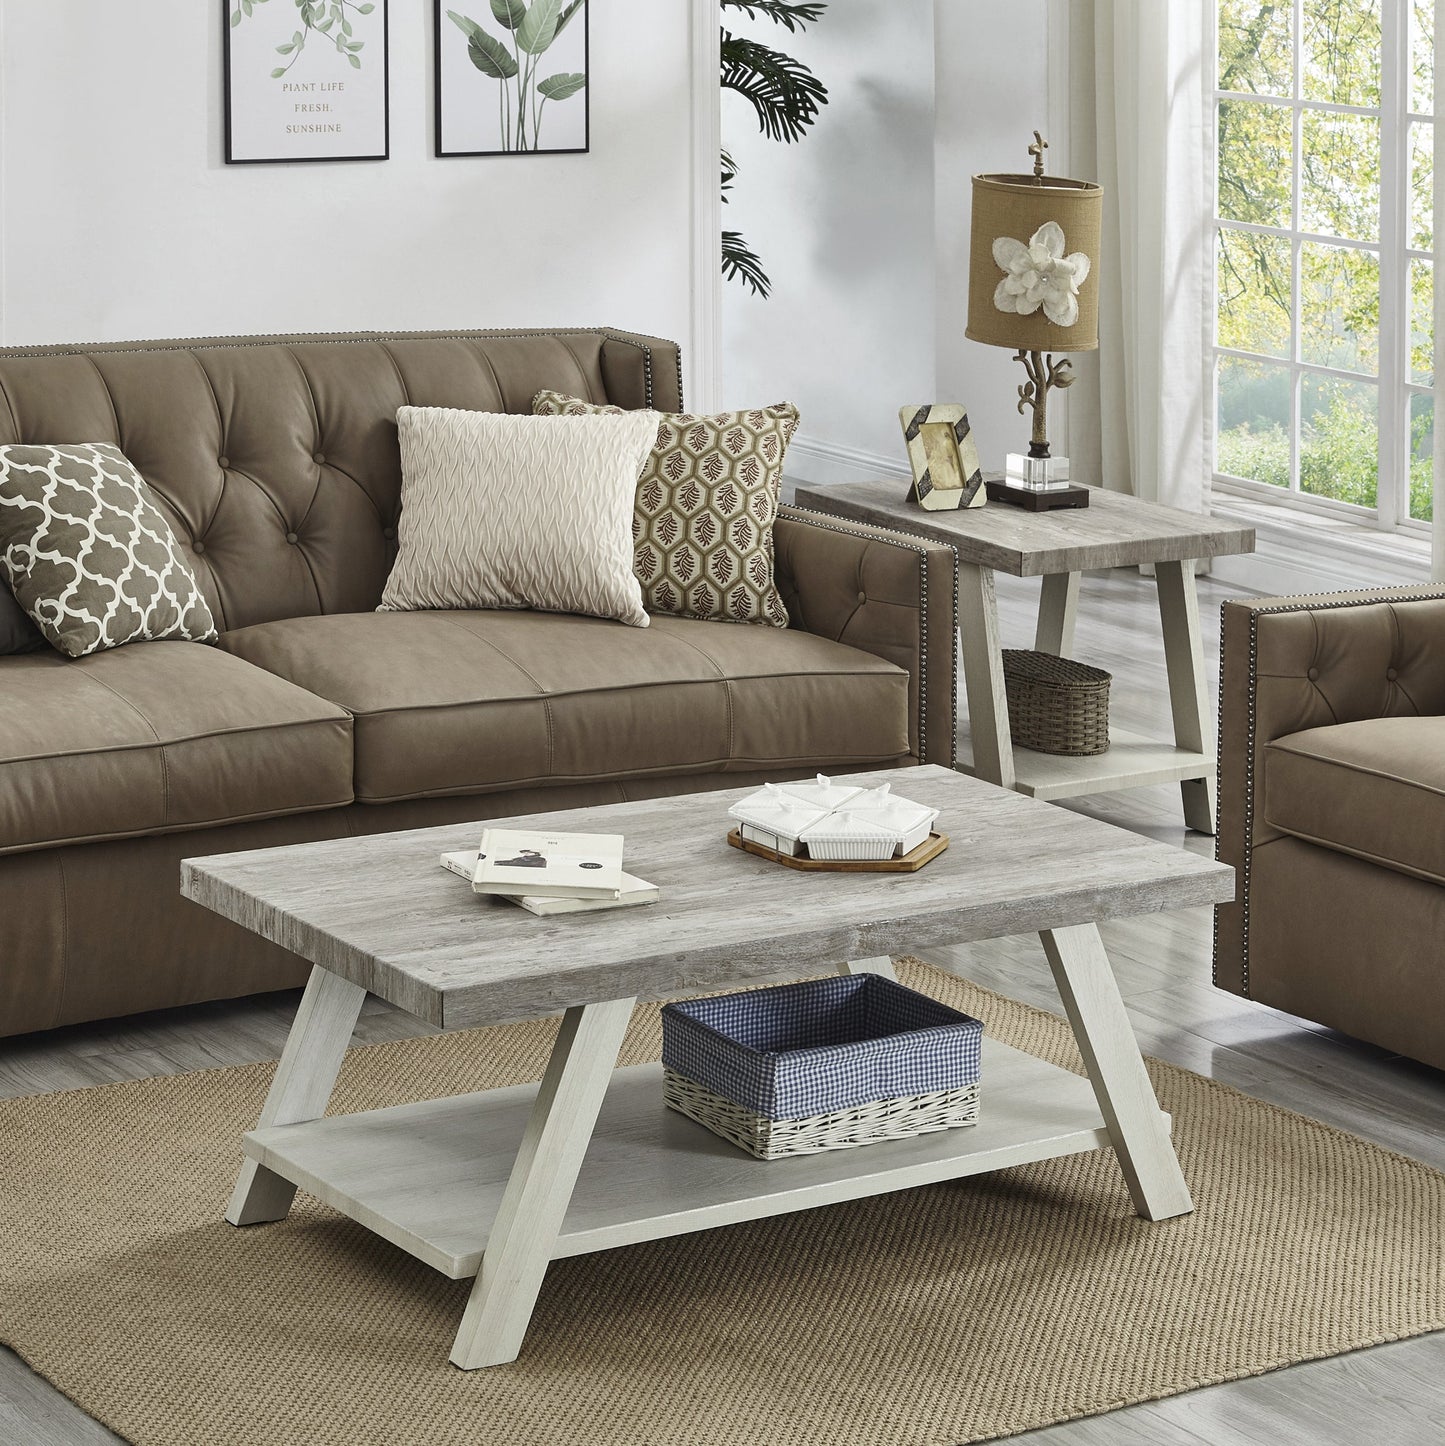 Athens Contemporary 3-Piece Wood Shelf Coffee Table Set in Weathered Gray and Beige